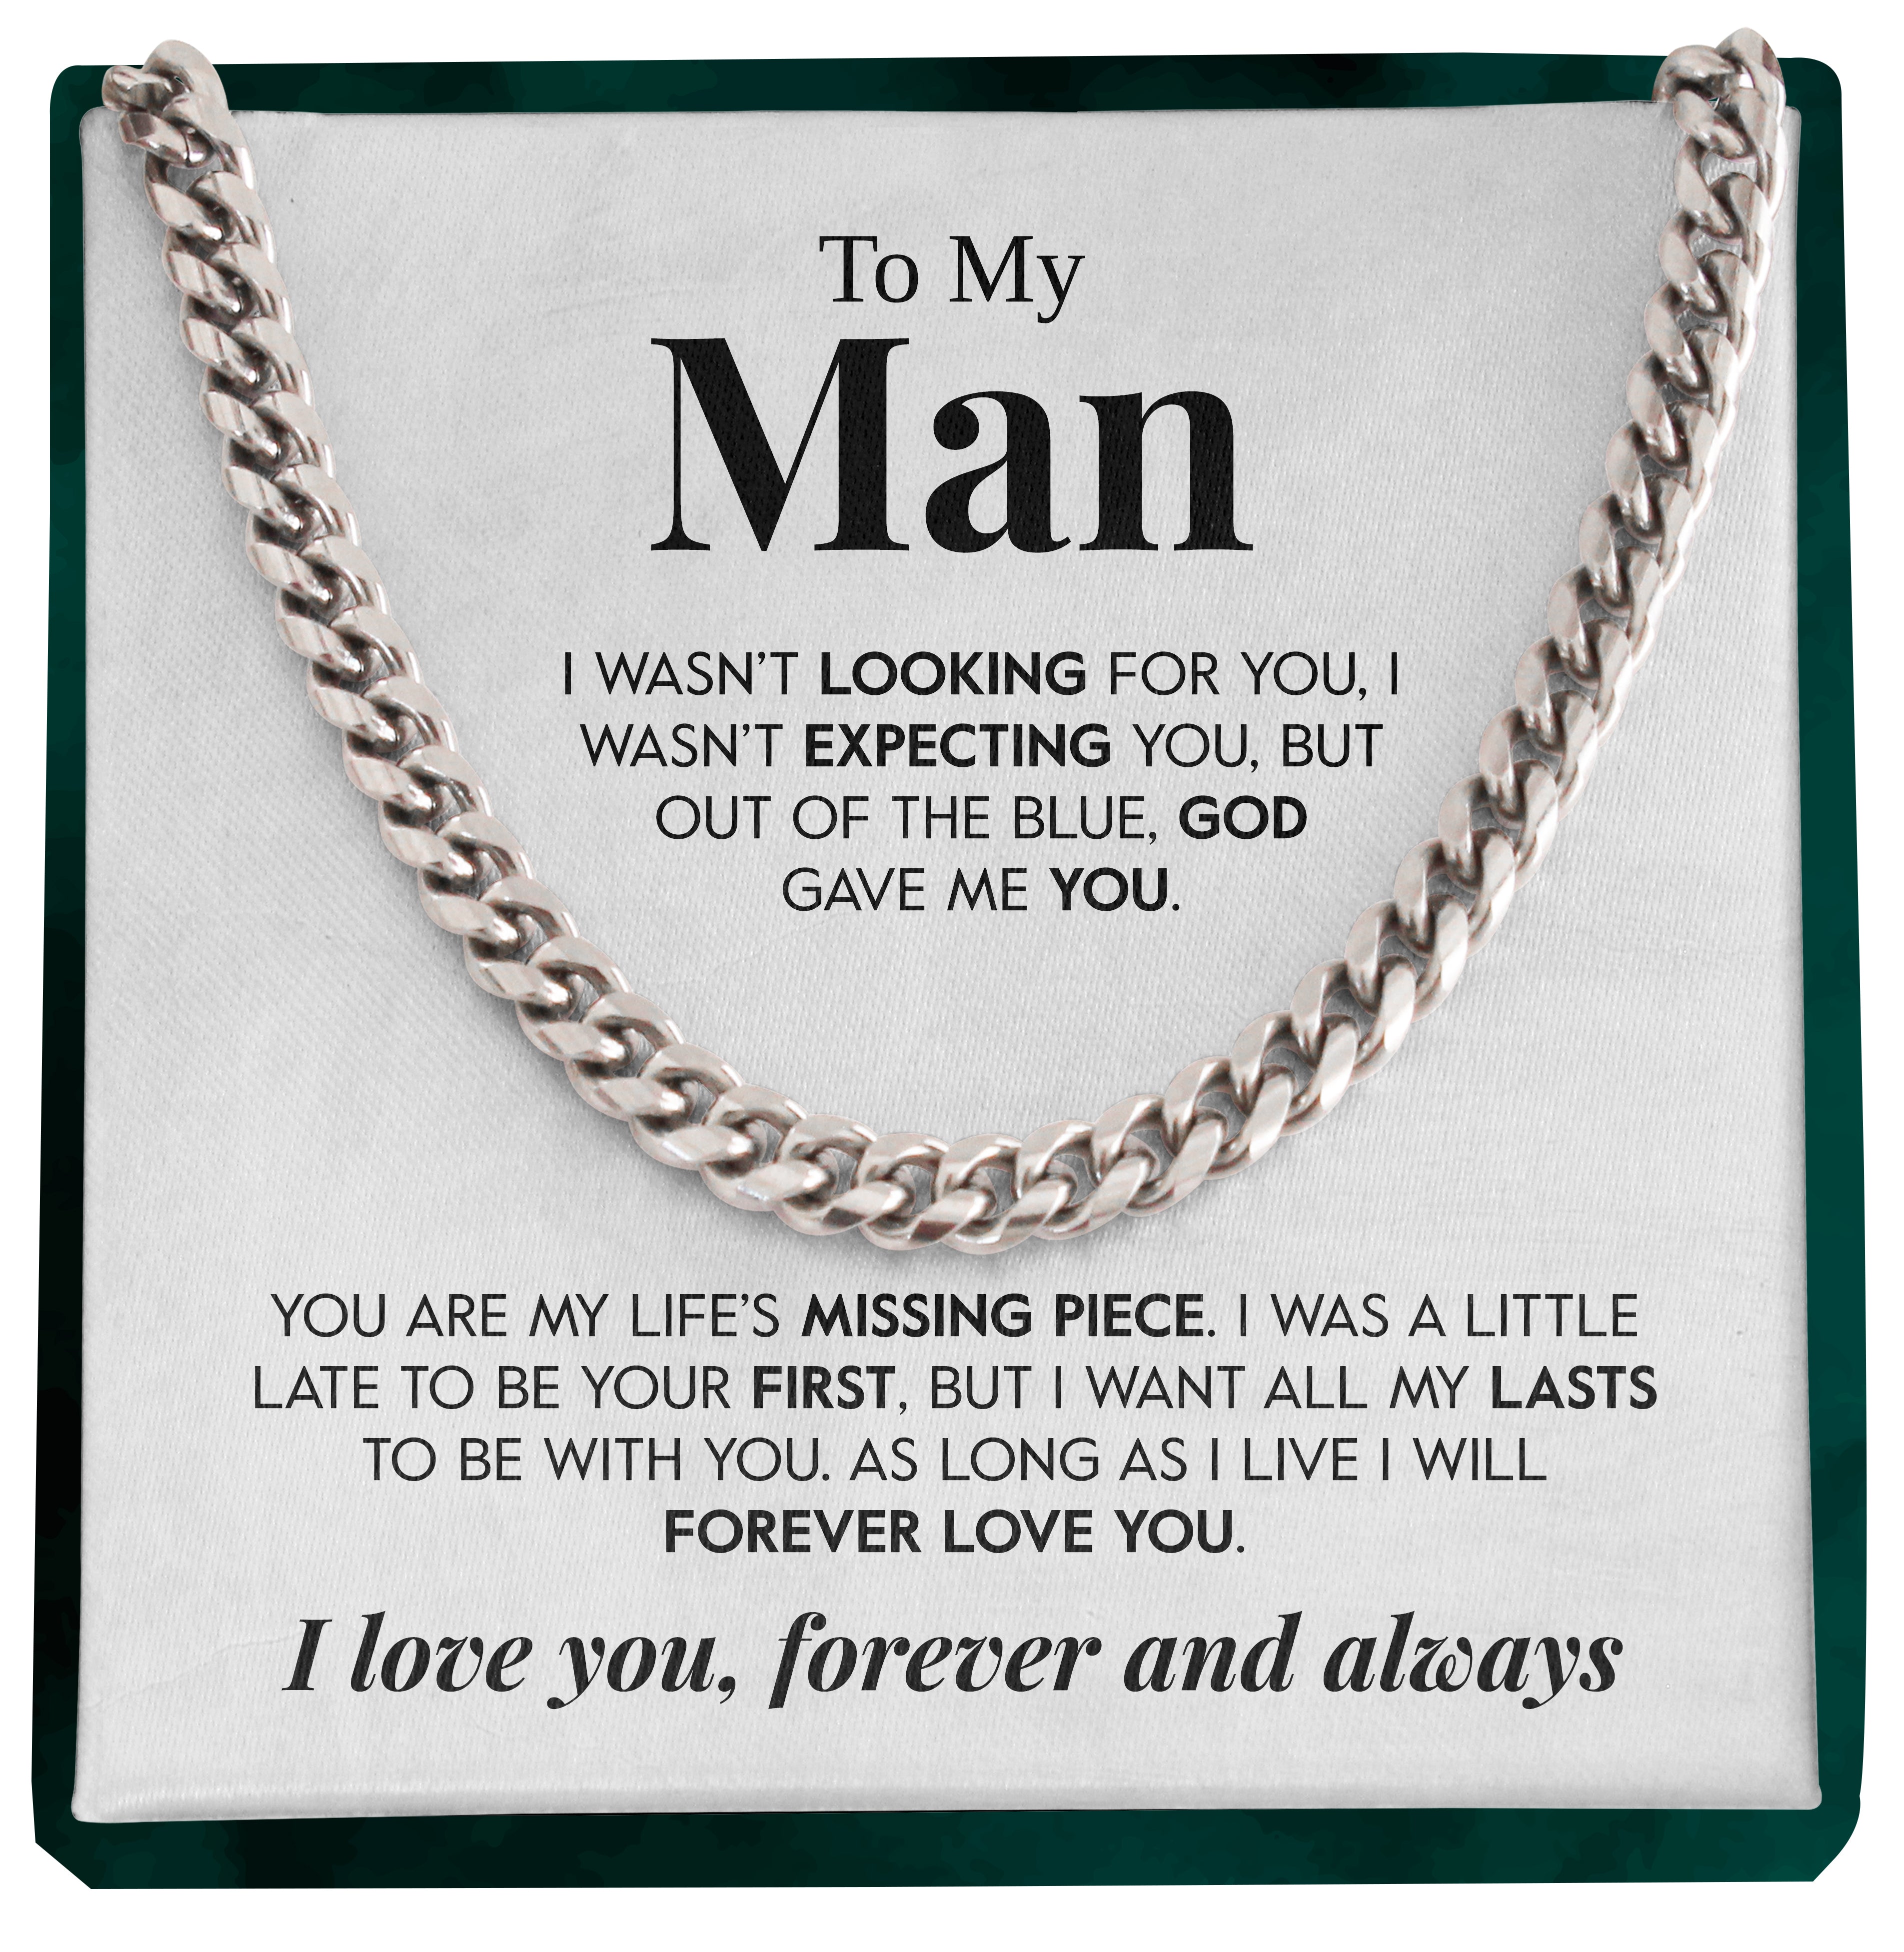 To My Man | "God Gave Me You" | Cuban Chain Link